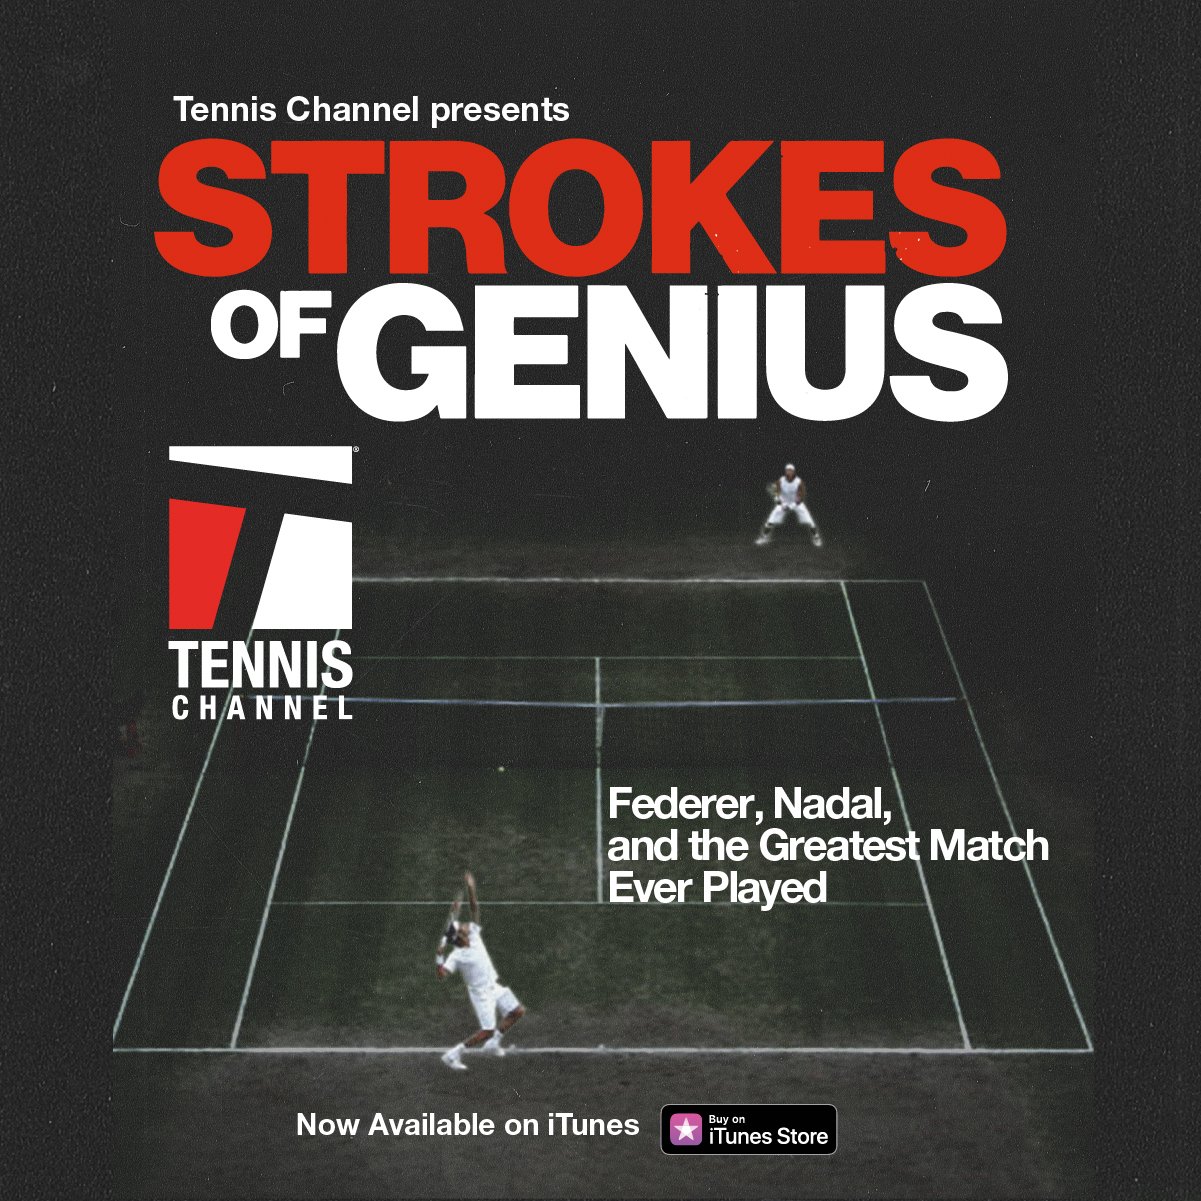 boykot Vær forsigtig udstødning Tennis Channel 님의 트위터: "Now you can relive the Wimbledon 2008 Men's Final  any time you want. Buy "Strokes of Genius" now on @iTunes→  https://t.co/SVERc8DRjQ #LongLiveRivalry https://t.co/0WTxgkWAco" / 트위터